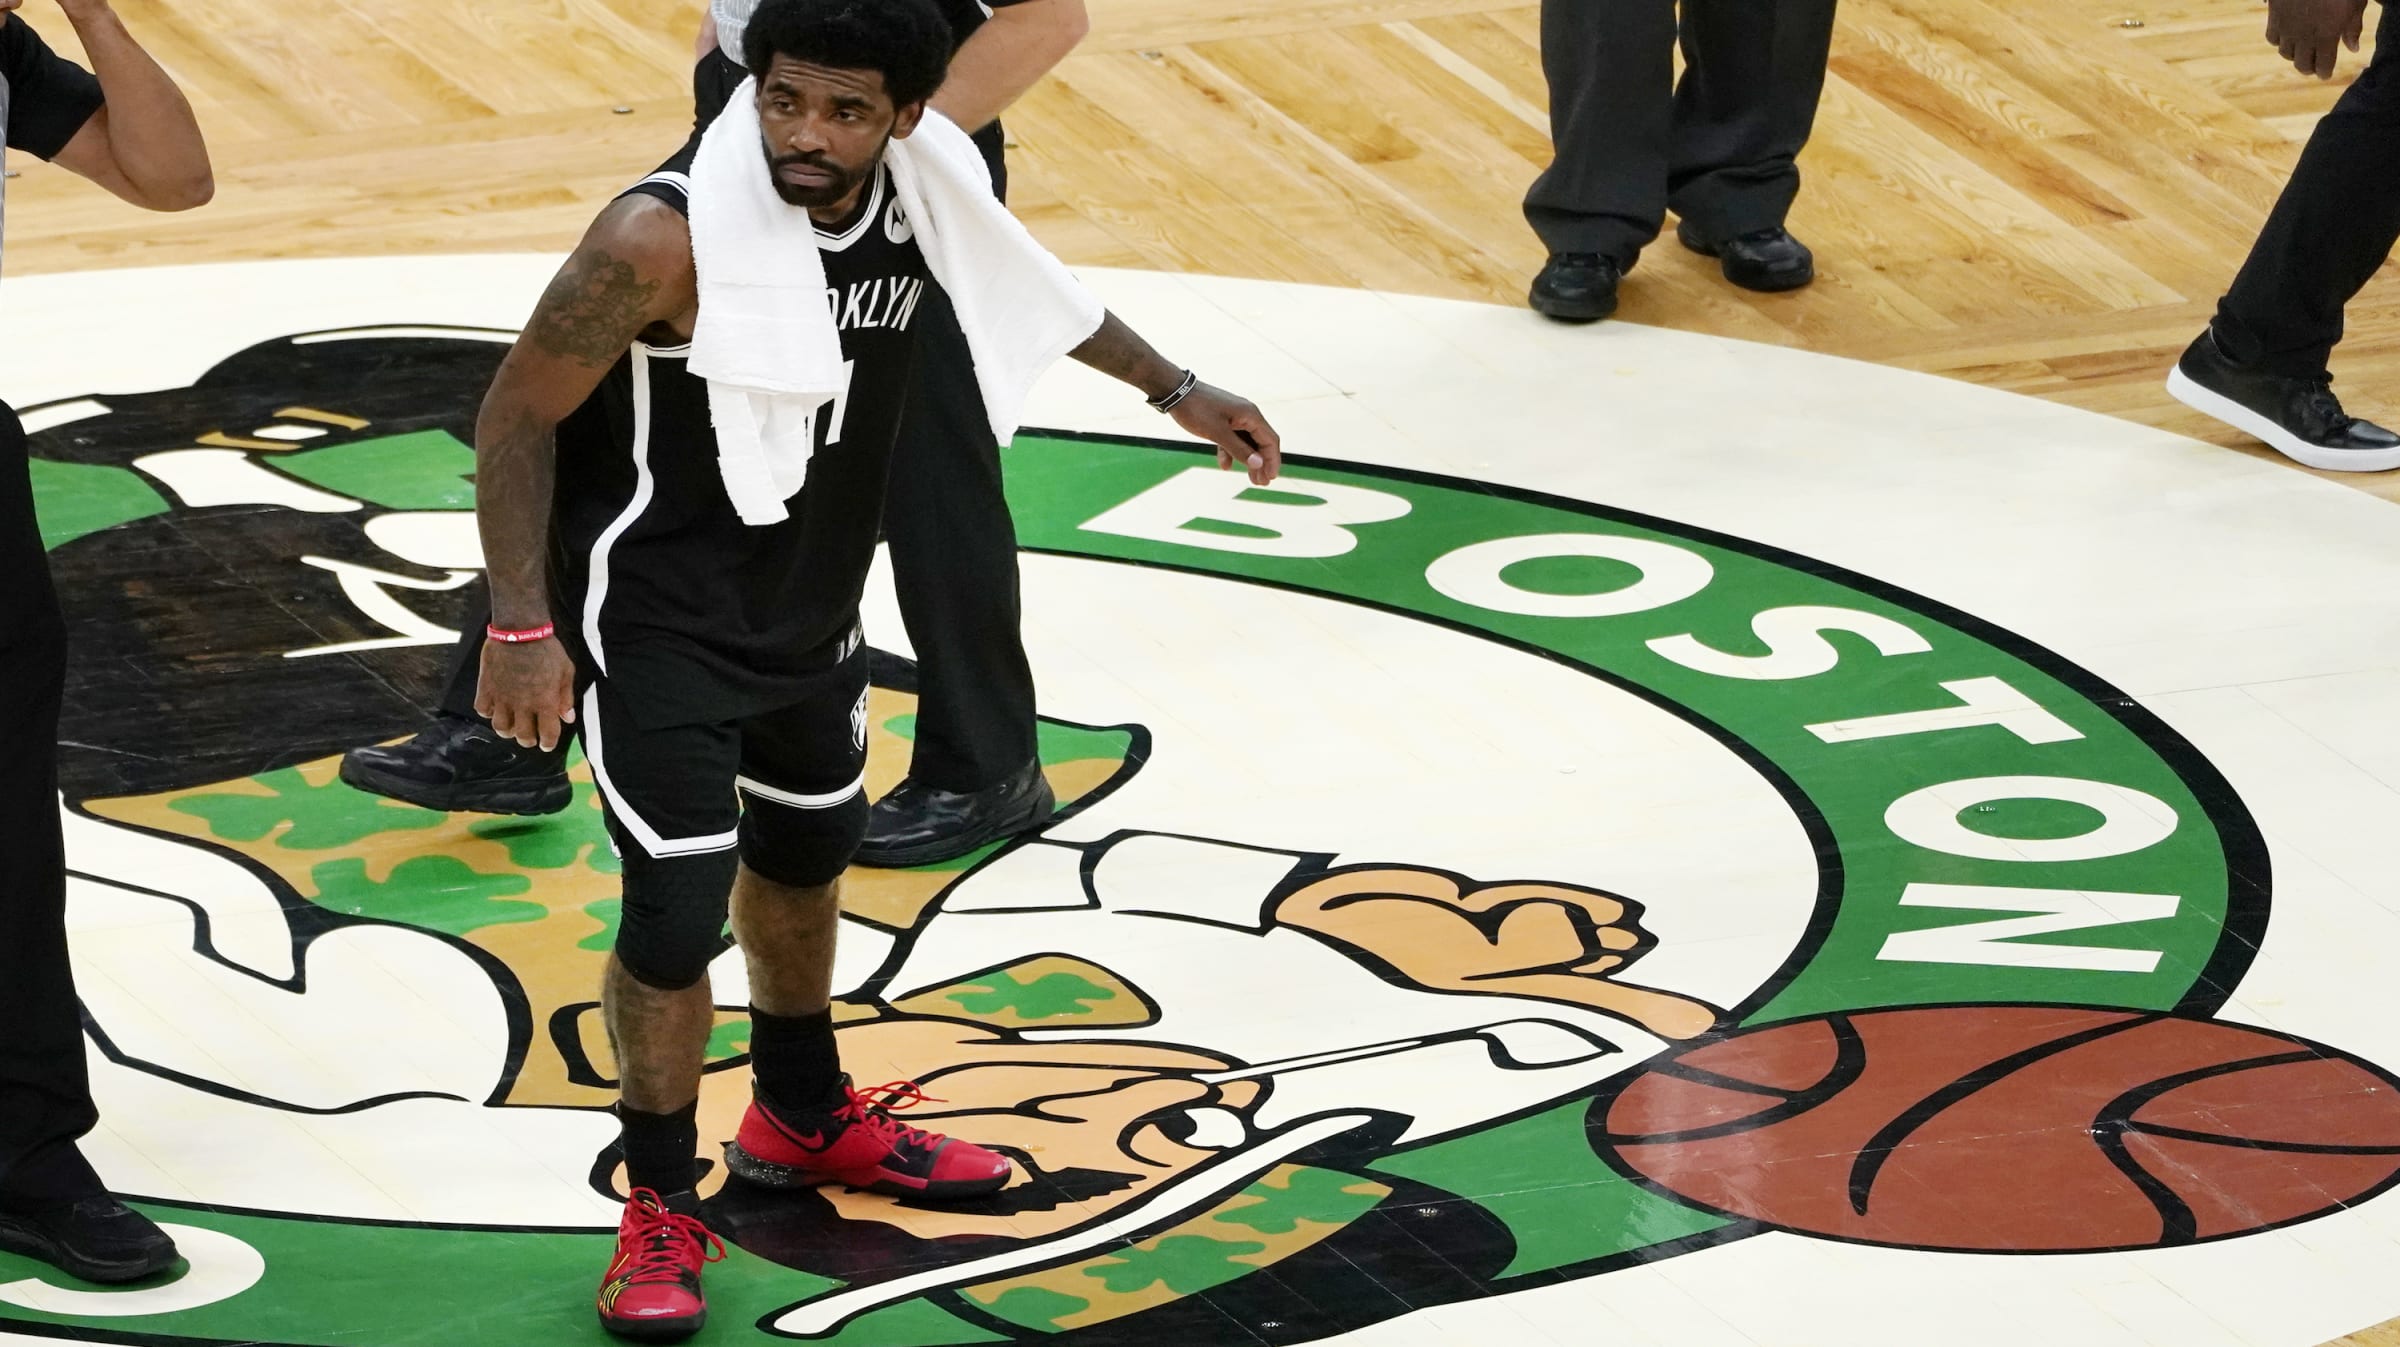 One-on-one with Boston Celtics and 'Uncle Drew' star Kyrie Irving